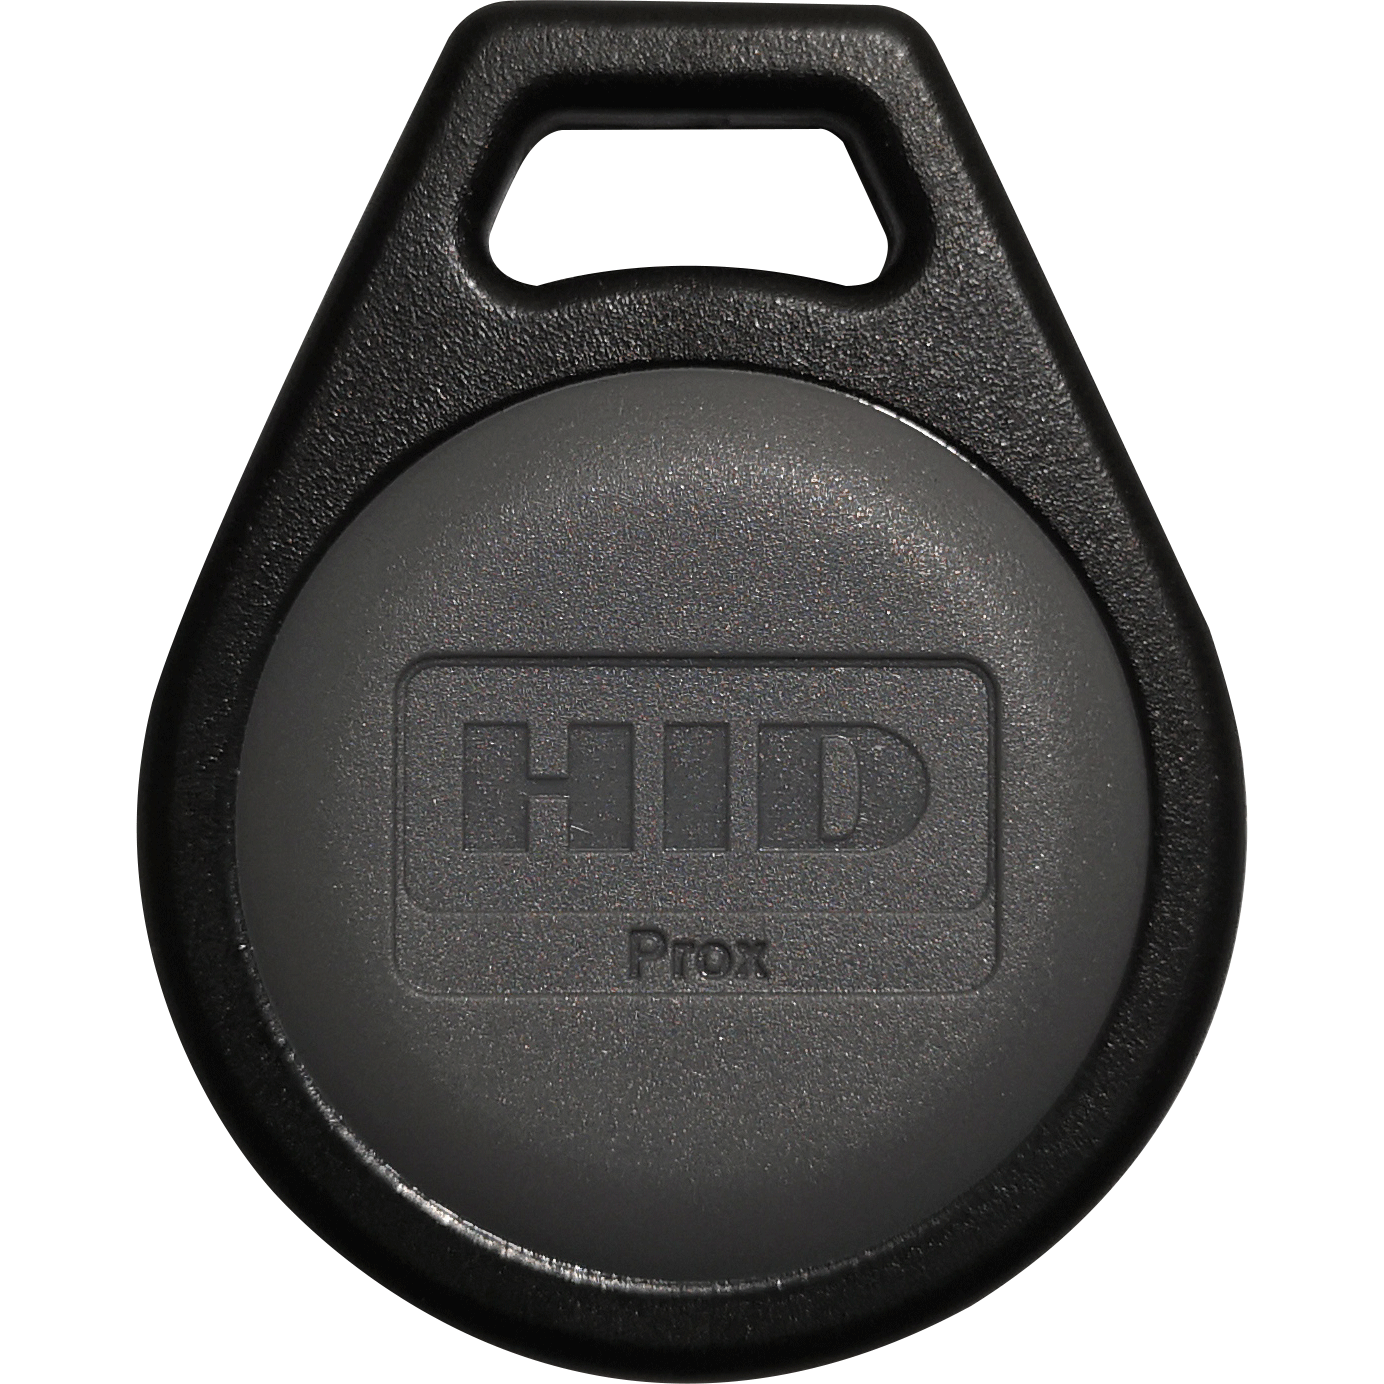 HID Prox Bulk fobs Prox Compatible HID system HID prox fobs management system fobs bulk fob order HID system Prox system easy convenient online